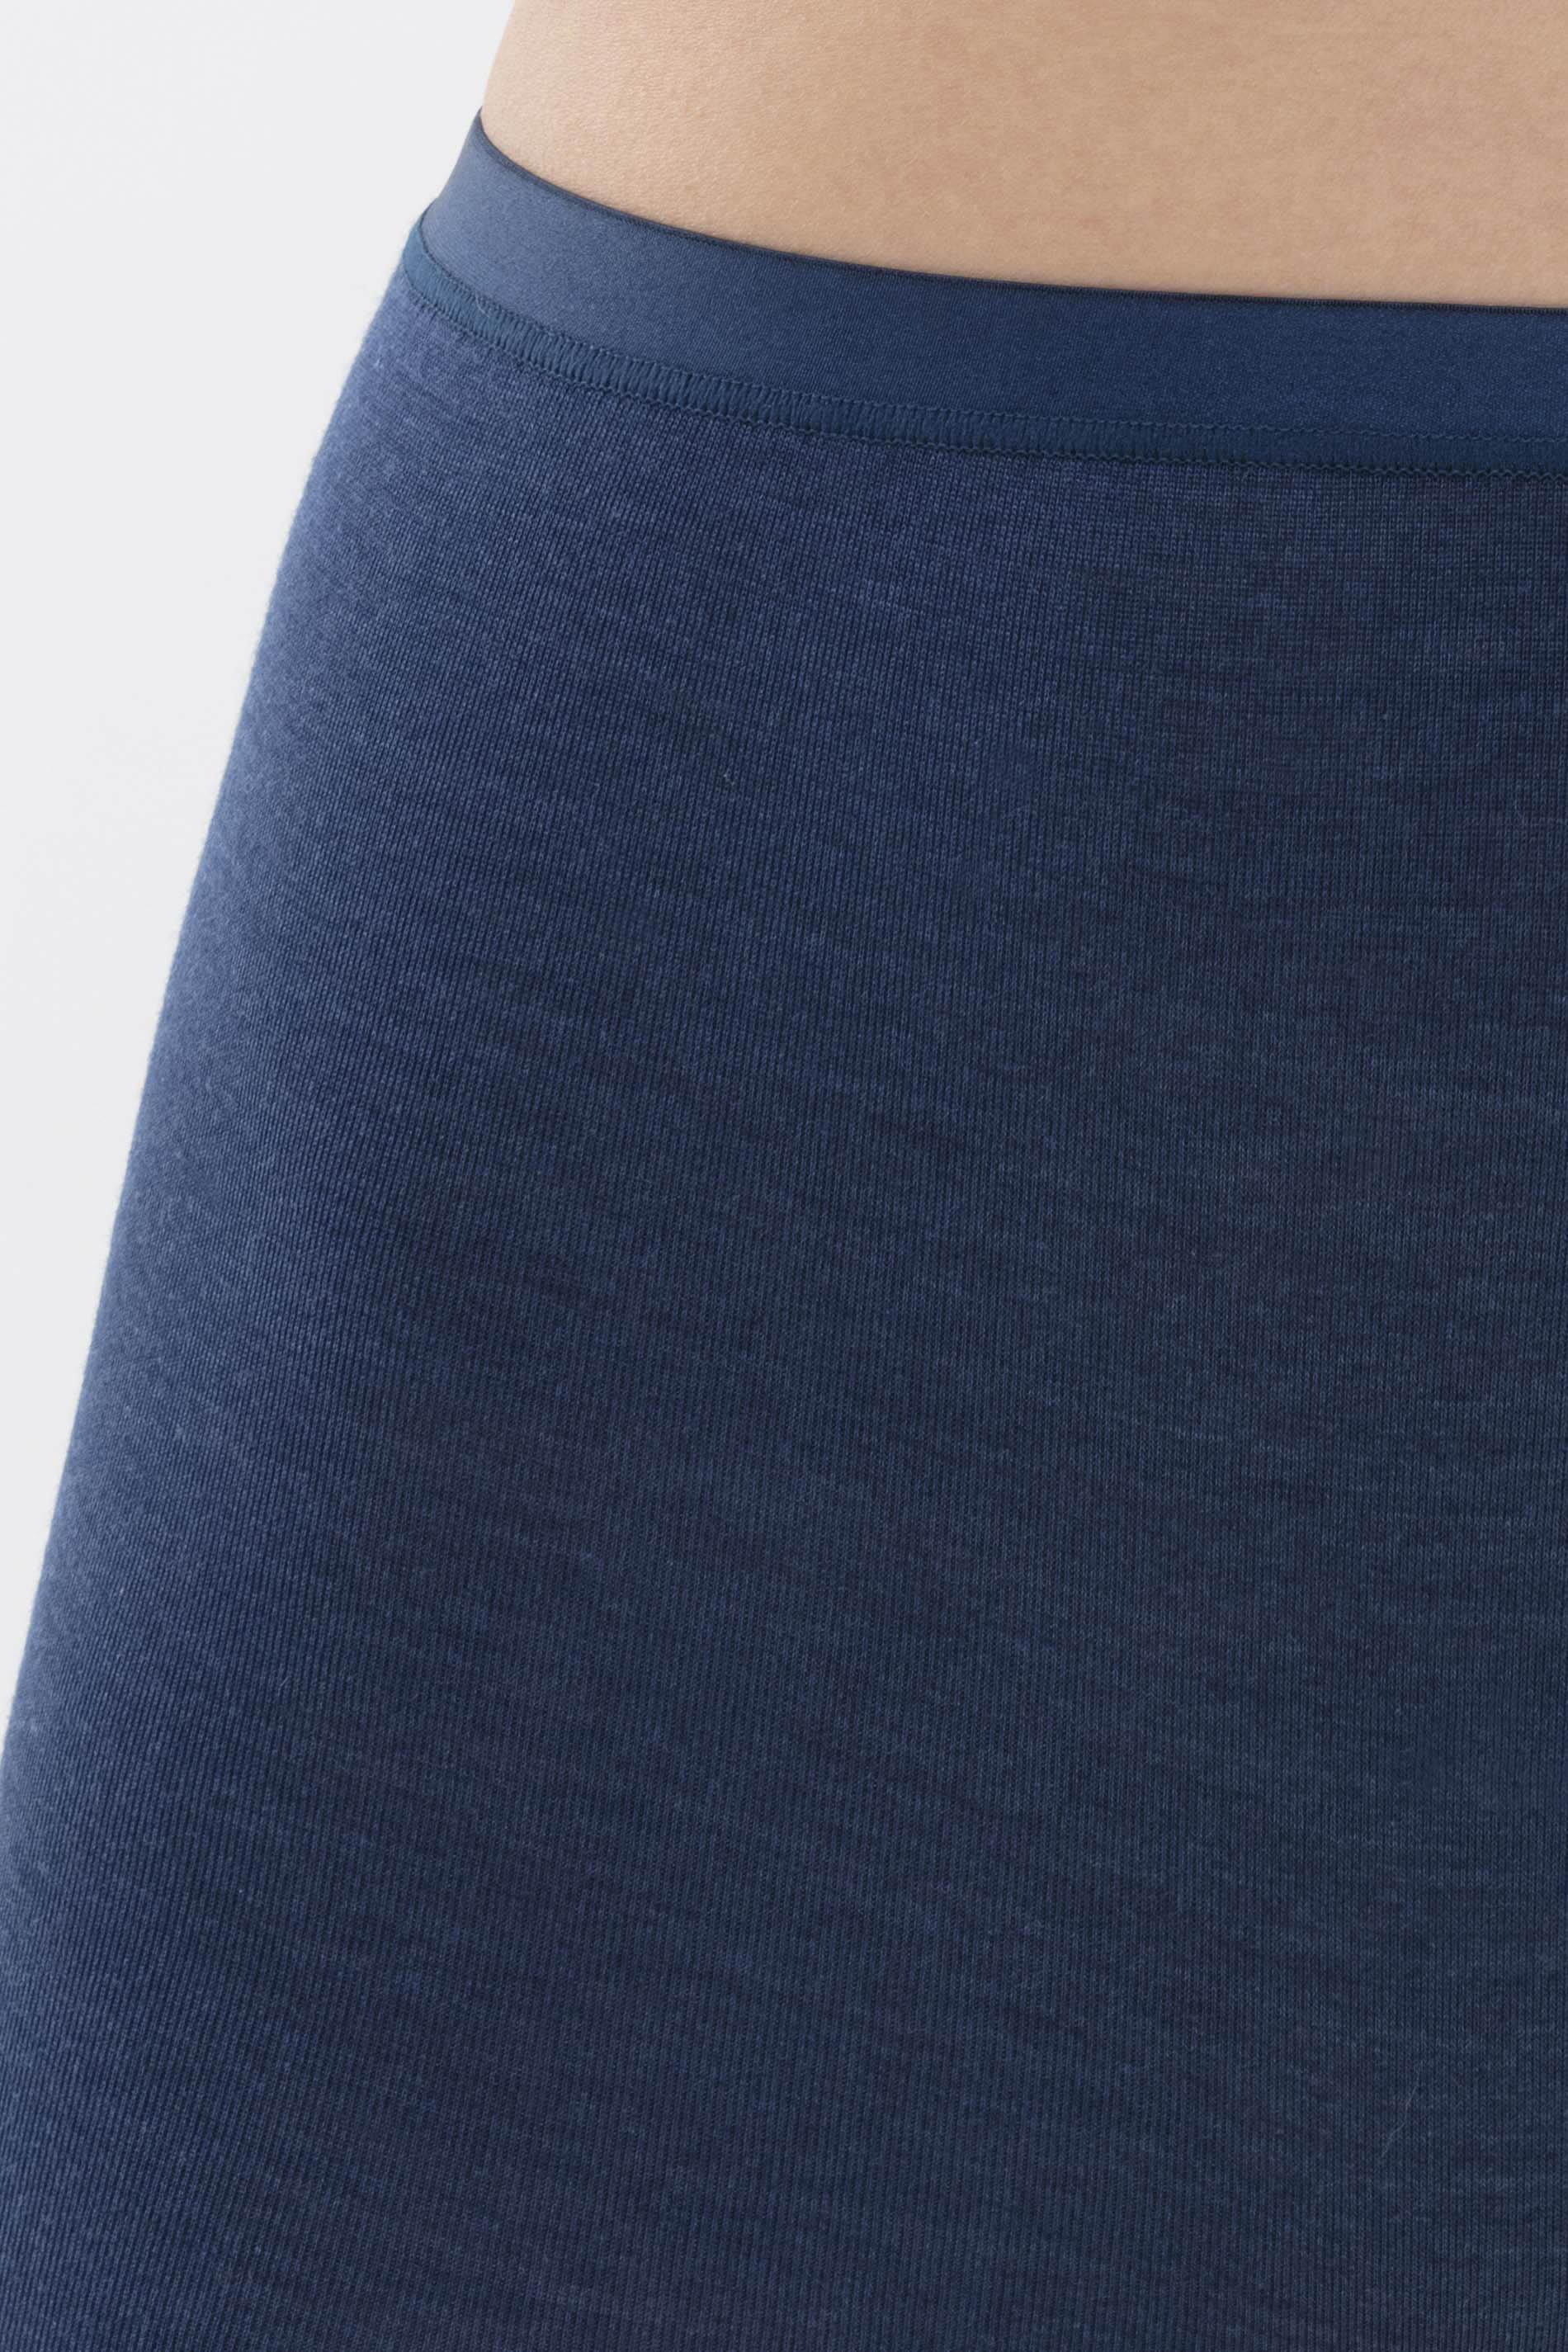 High-waisted briefs Ink Blue Serie Exquisite Detail View 01 | mey®